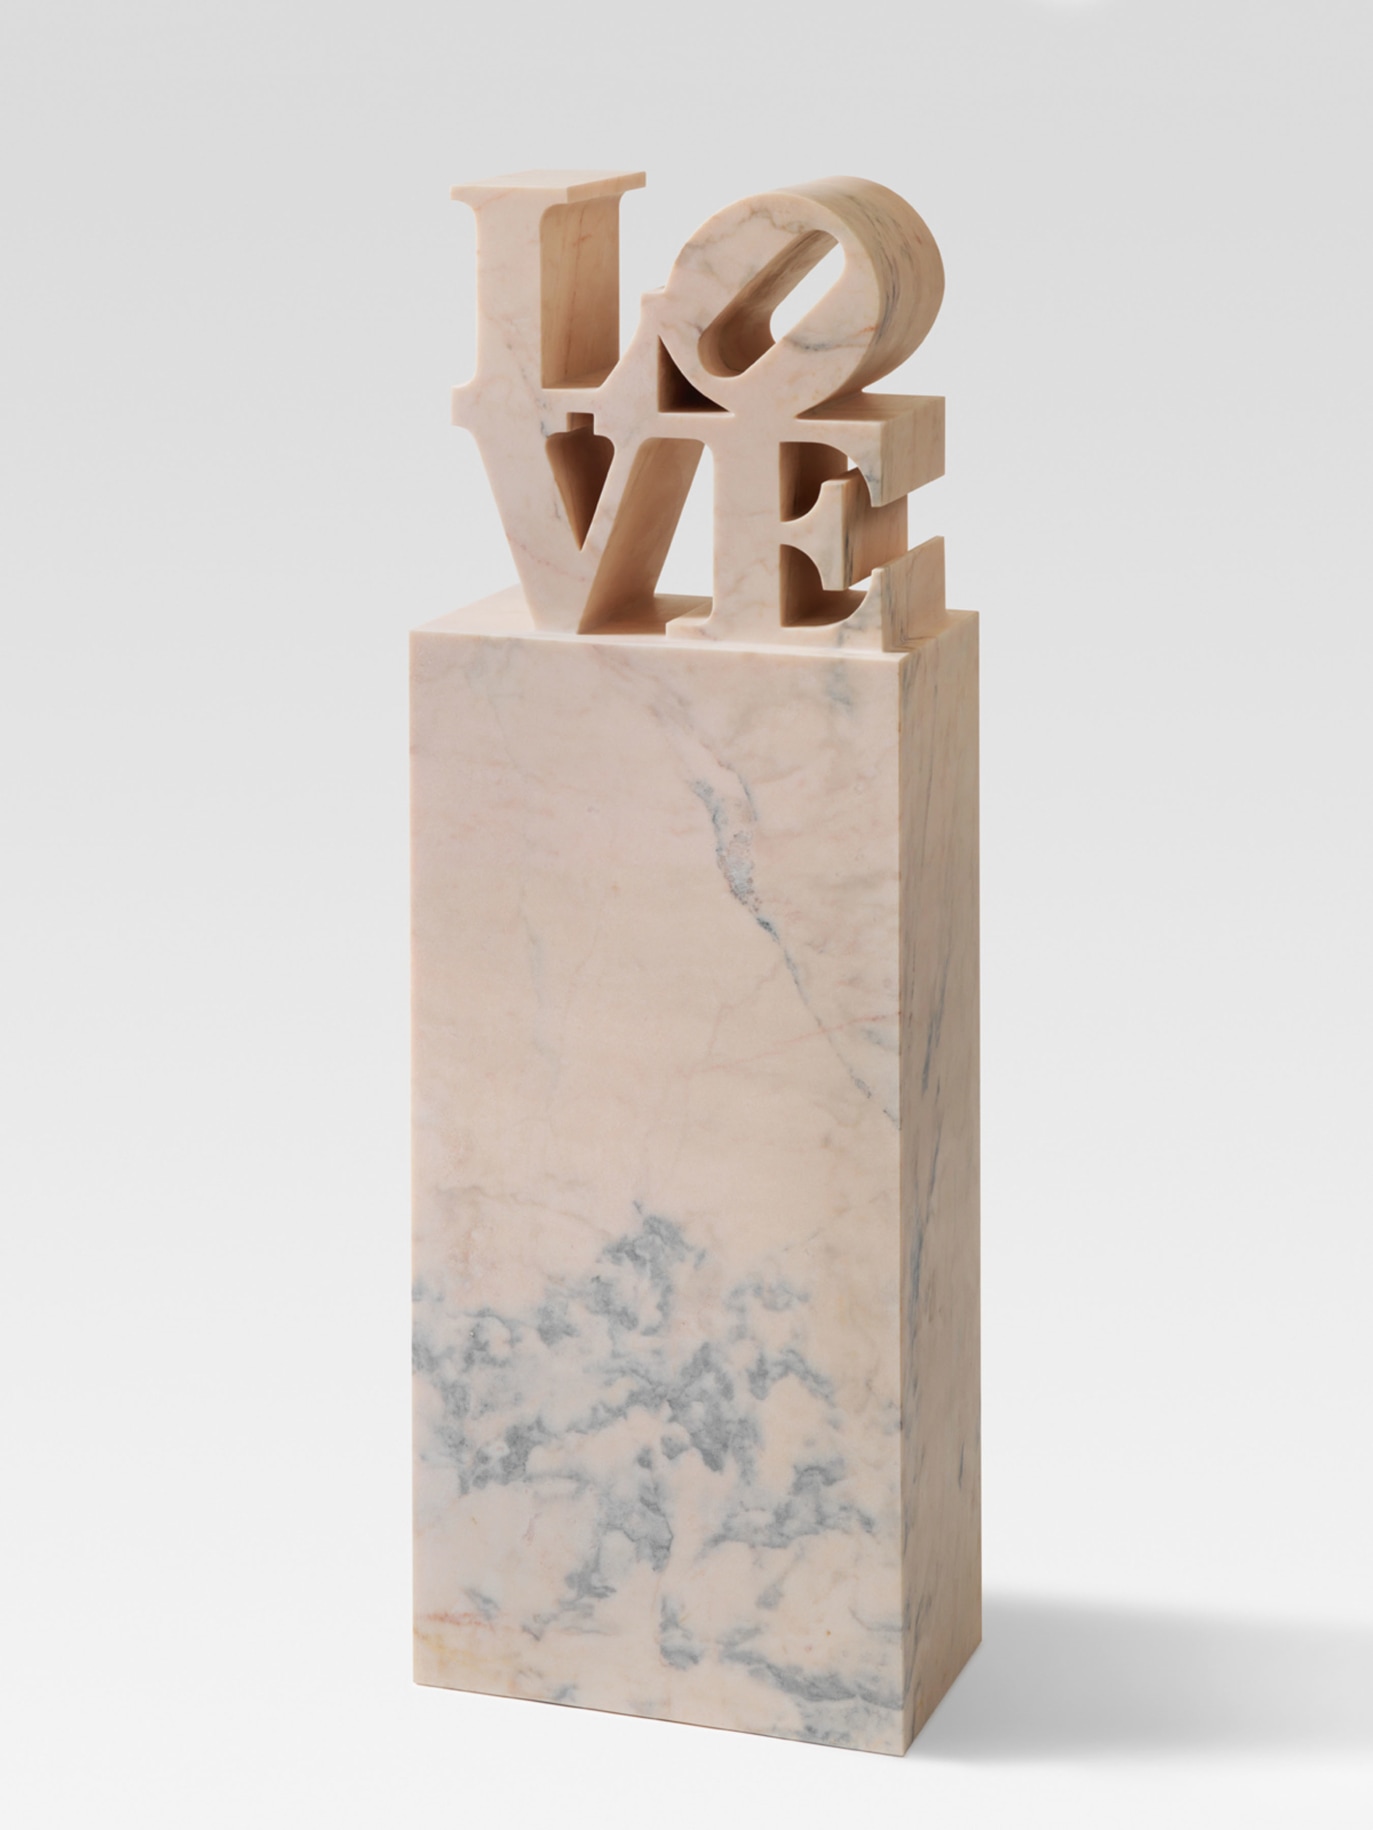 LOVE is a 65 15/16 &times; 22 1/8 &times; 12 5/16 inch, including the base, pink marble sculpture with the letters L and a tilted O stacked above the letters V and E, atop a tall rectangular base.